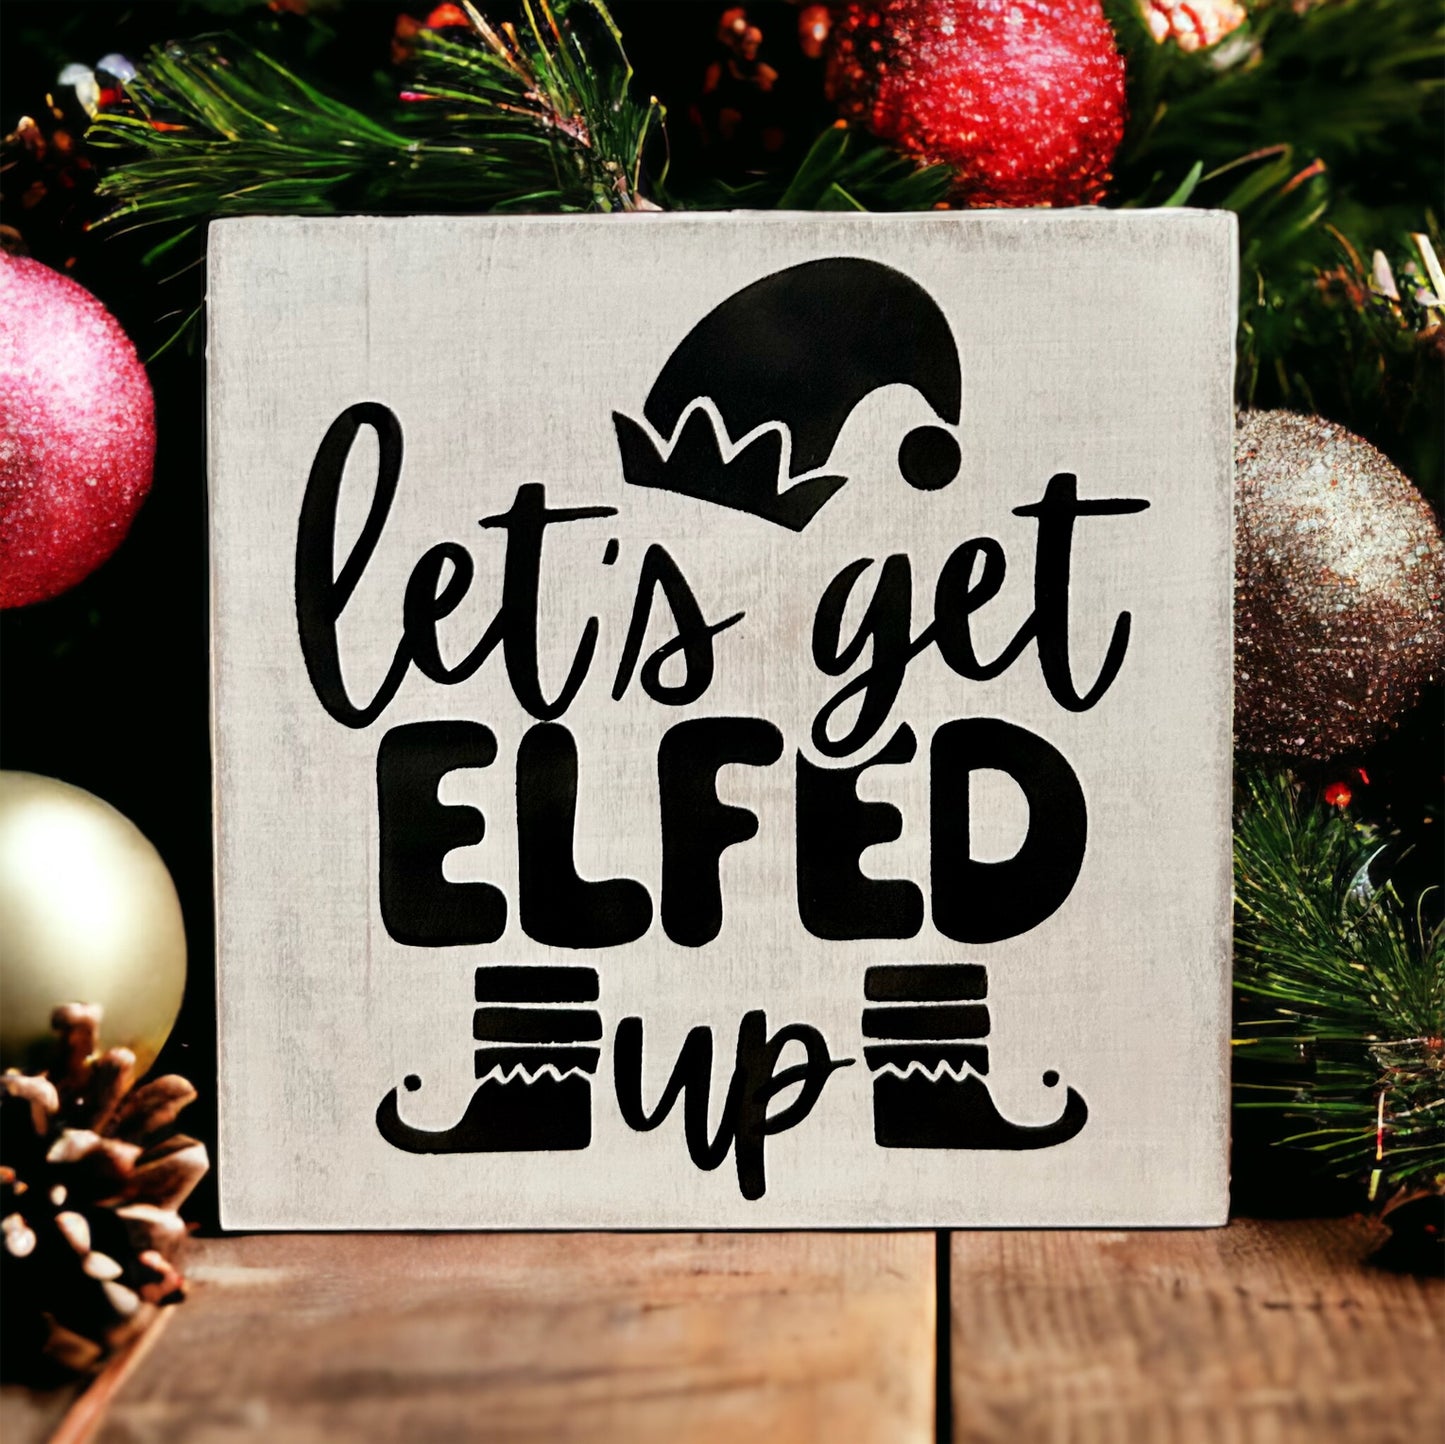 Let's Get Elfed Up -Funny Rustic Holiday/Christmas Wood Sign